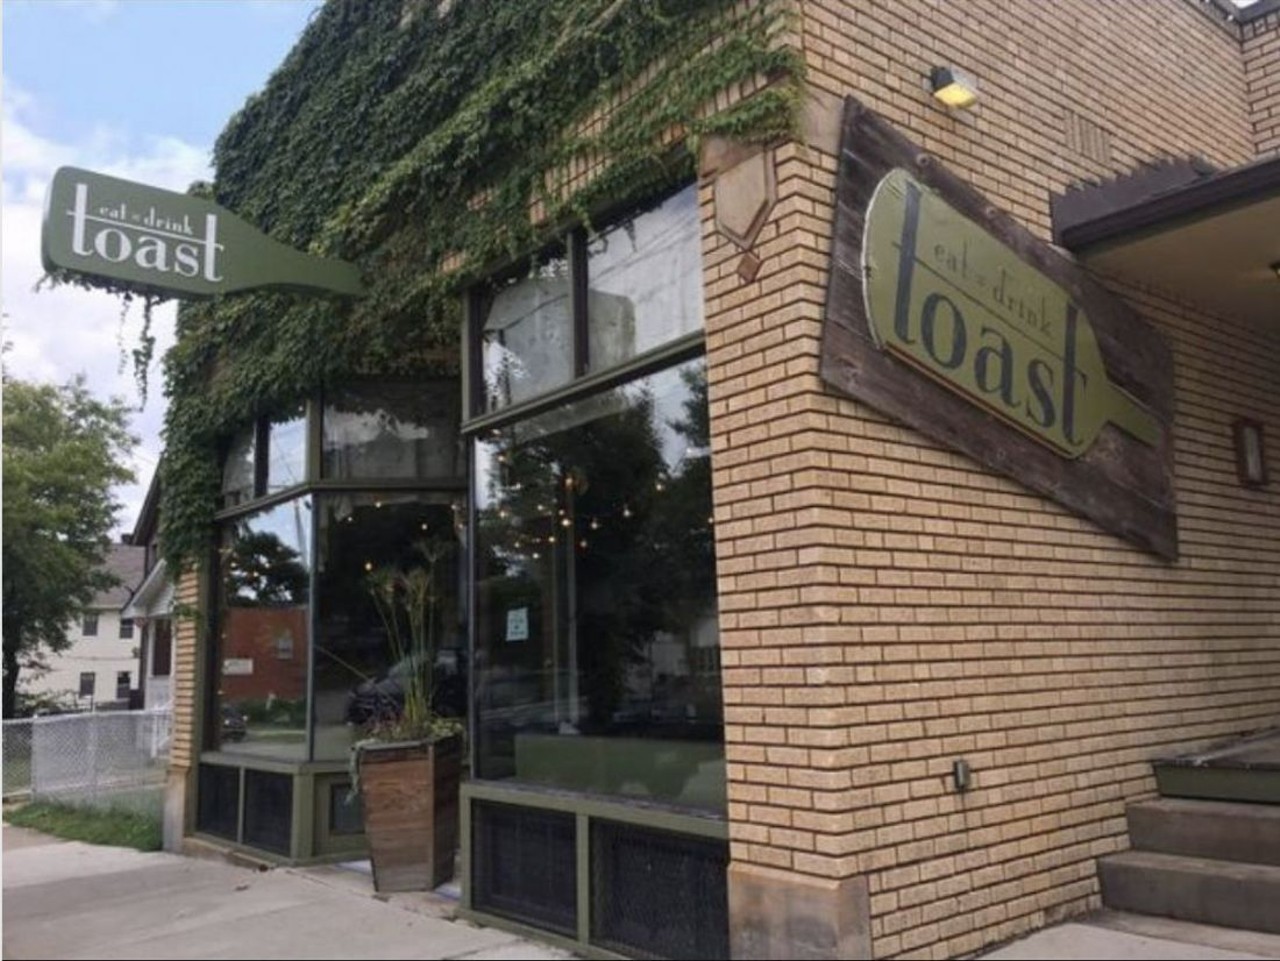  Toast
1365 W. 65th., Cleveland
Gordon Square&#146;s Toast is one of the most fun and unique dining experiences in town. 
Photo via @Toast_Cle/Instagram